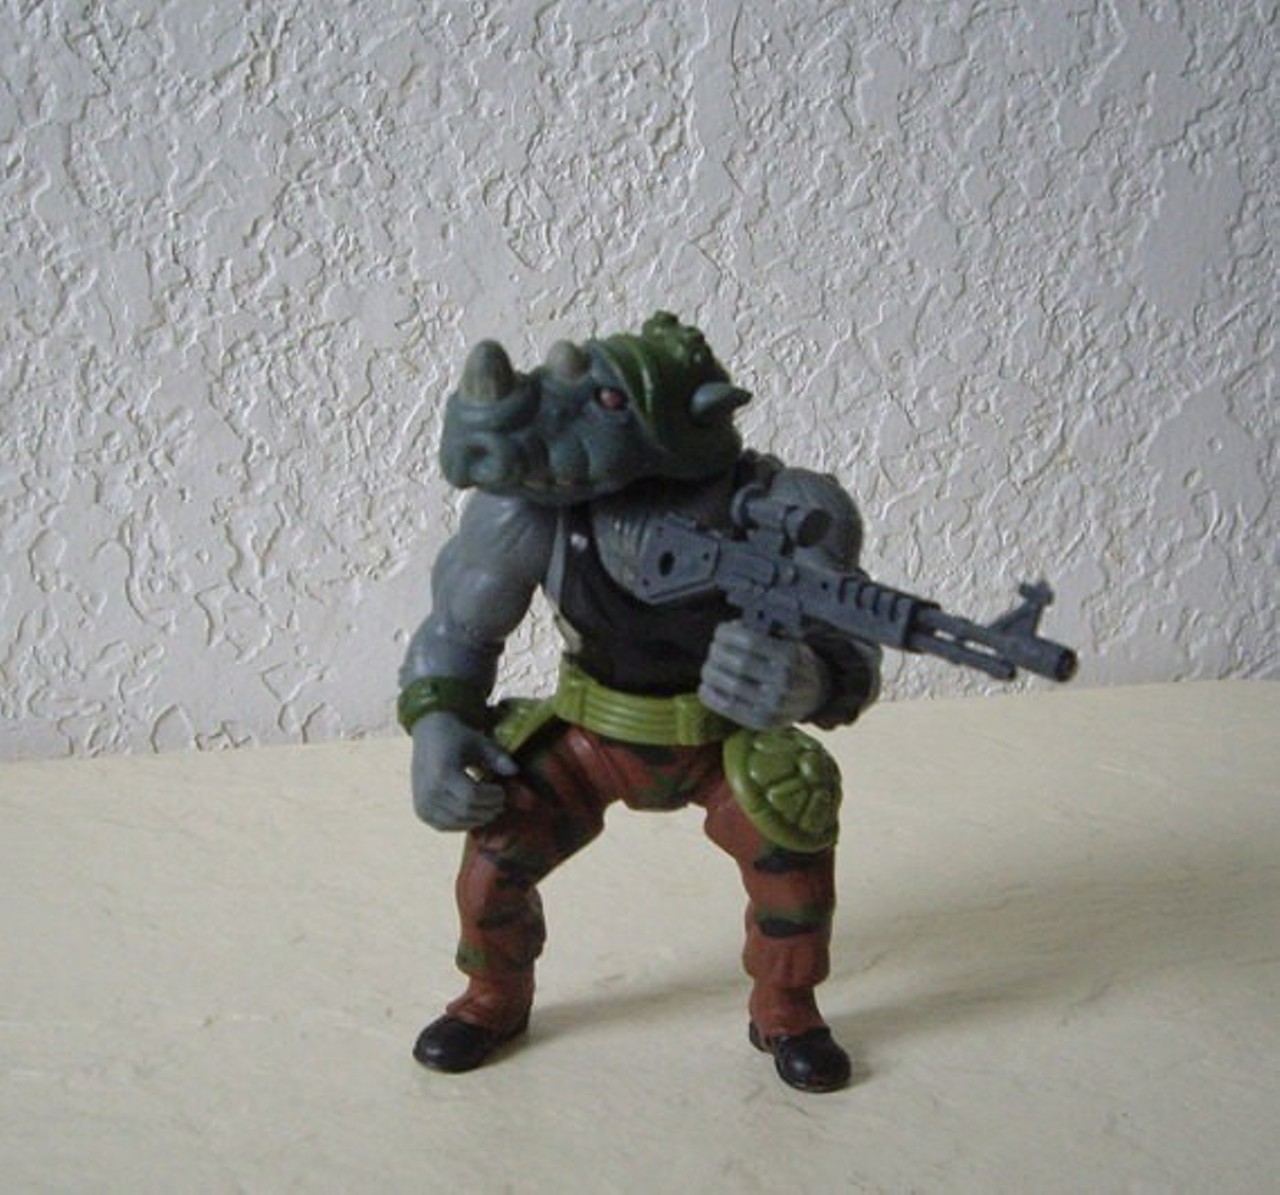 You could run into a man named Rhino, who may or may not have a rocket launcher. 
Photo via Etsy